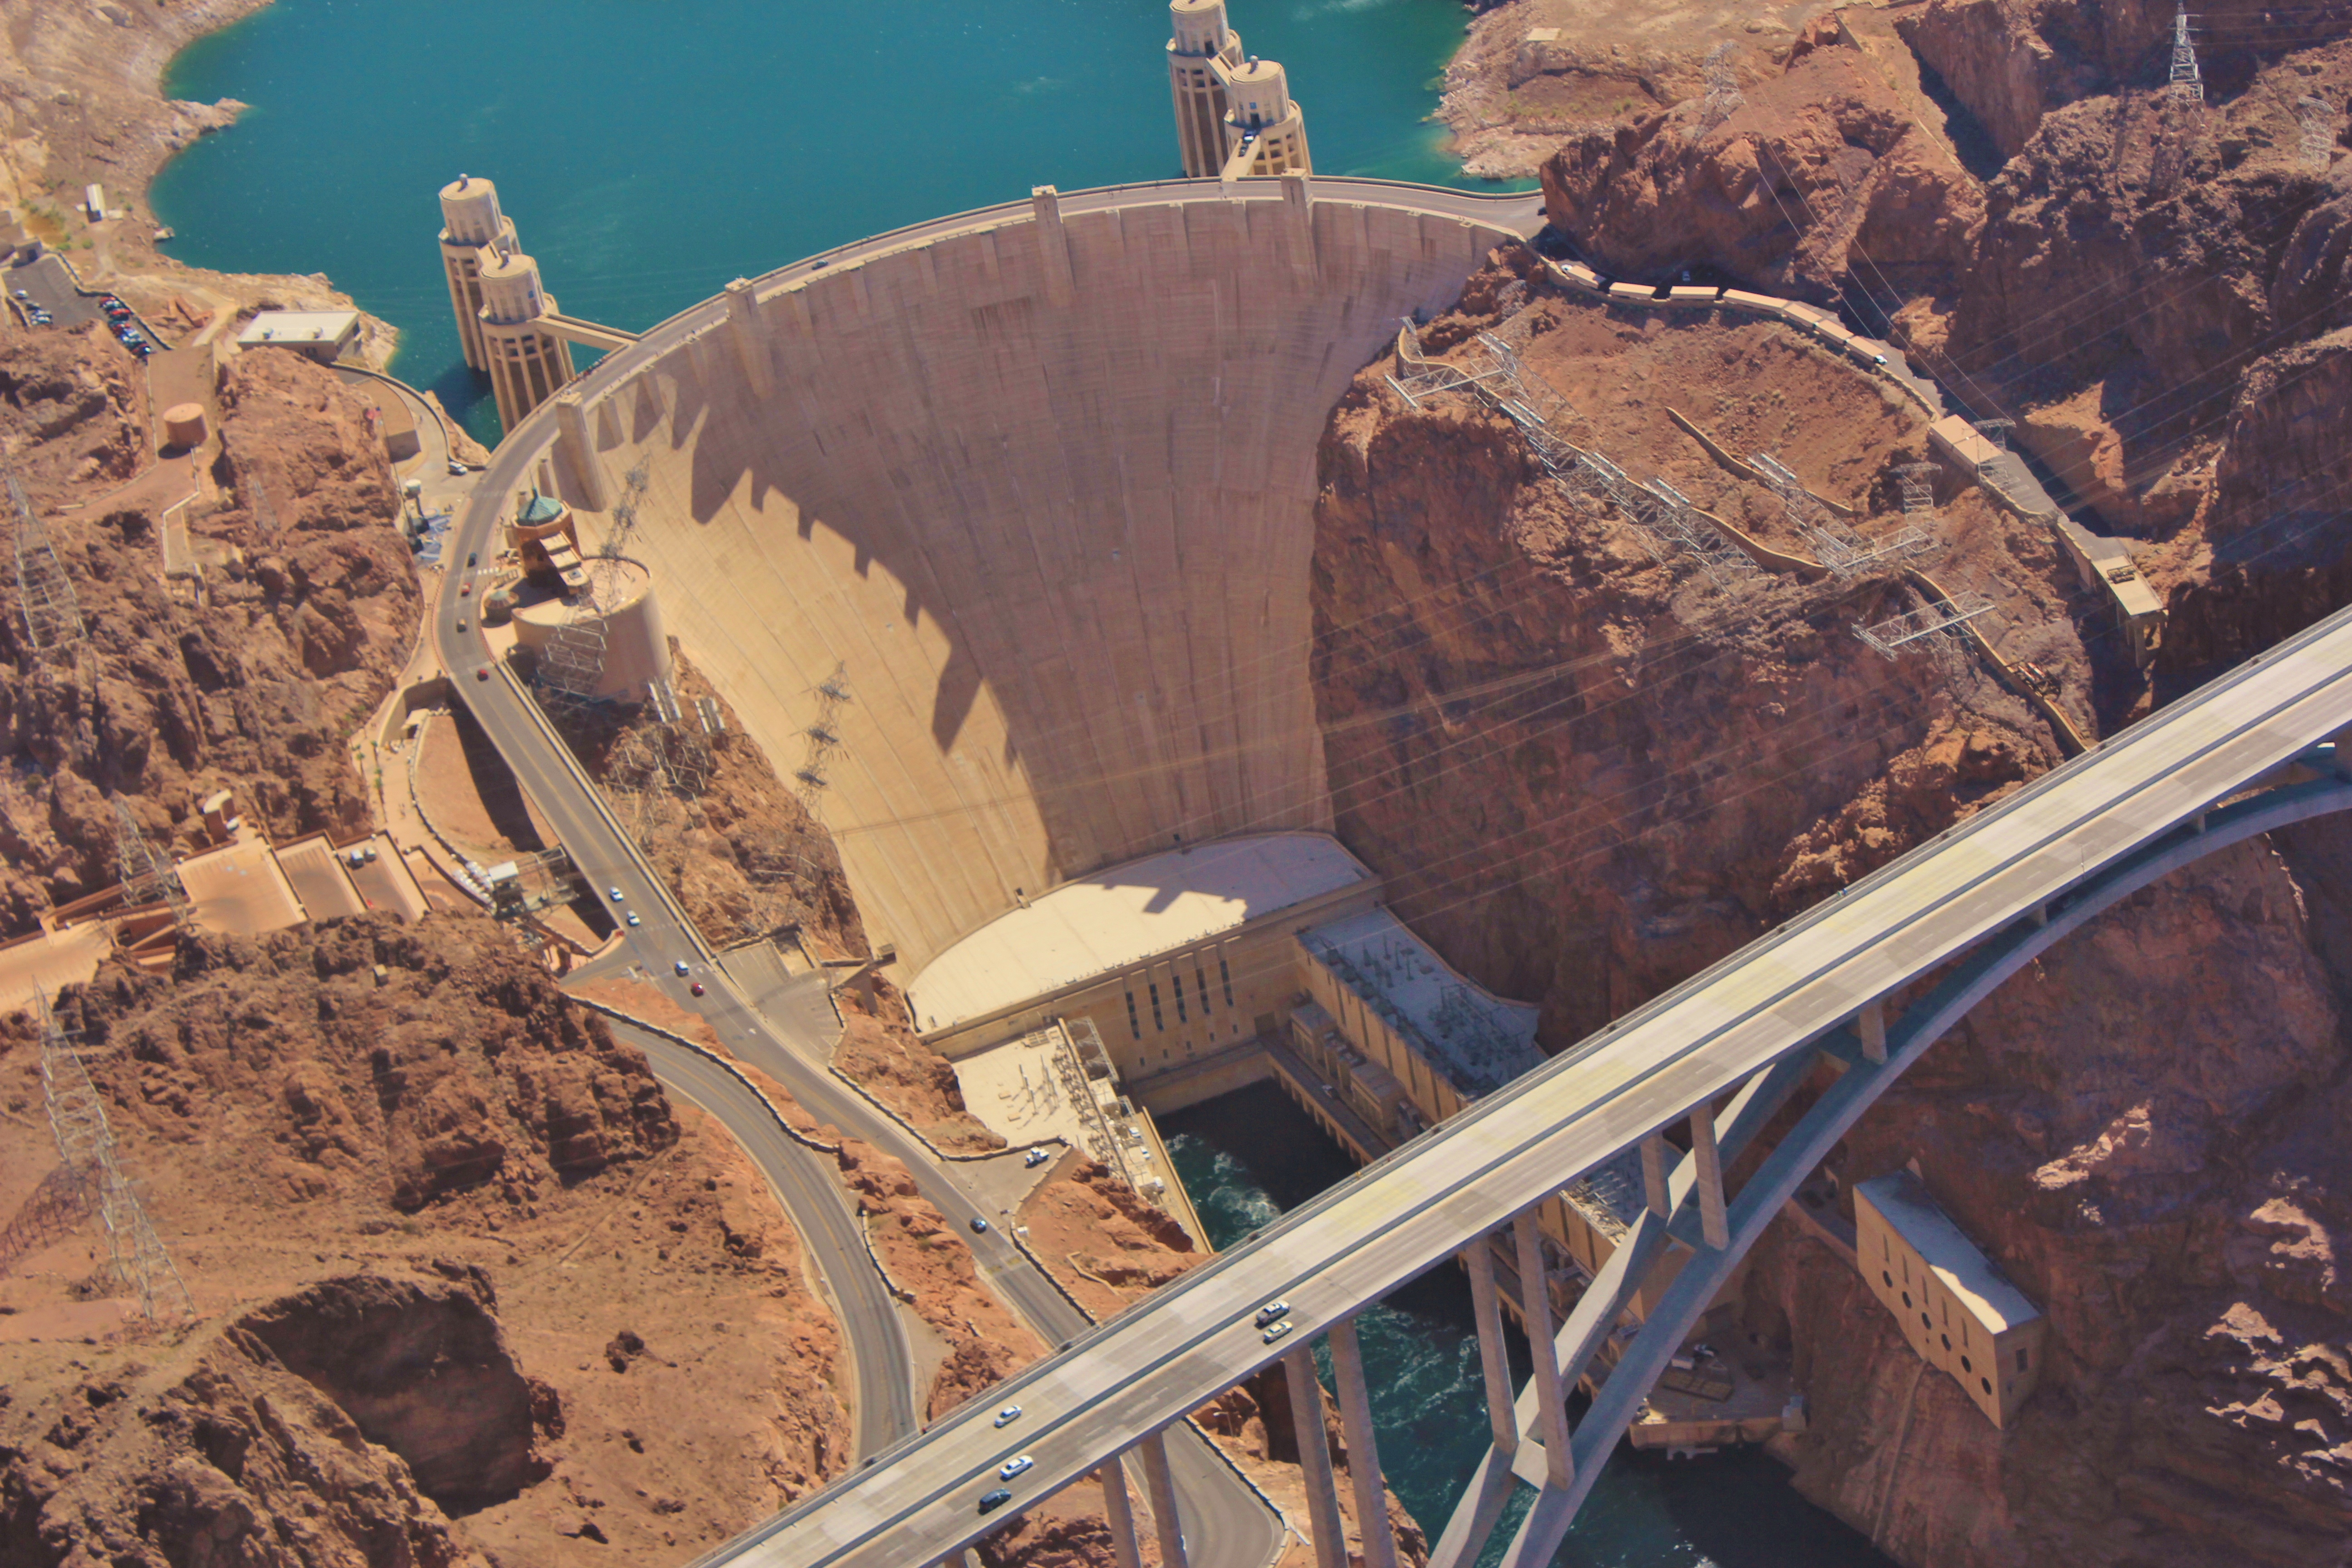 Liguori v. Hansen: a Hoover dam artist climbs to victory in the latest copyright infringement suit